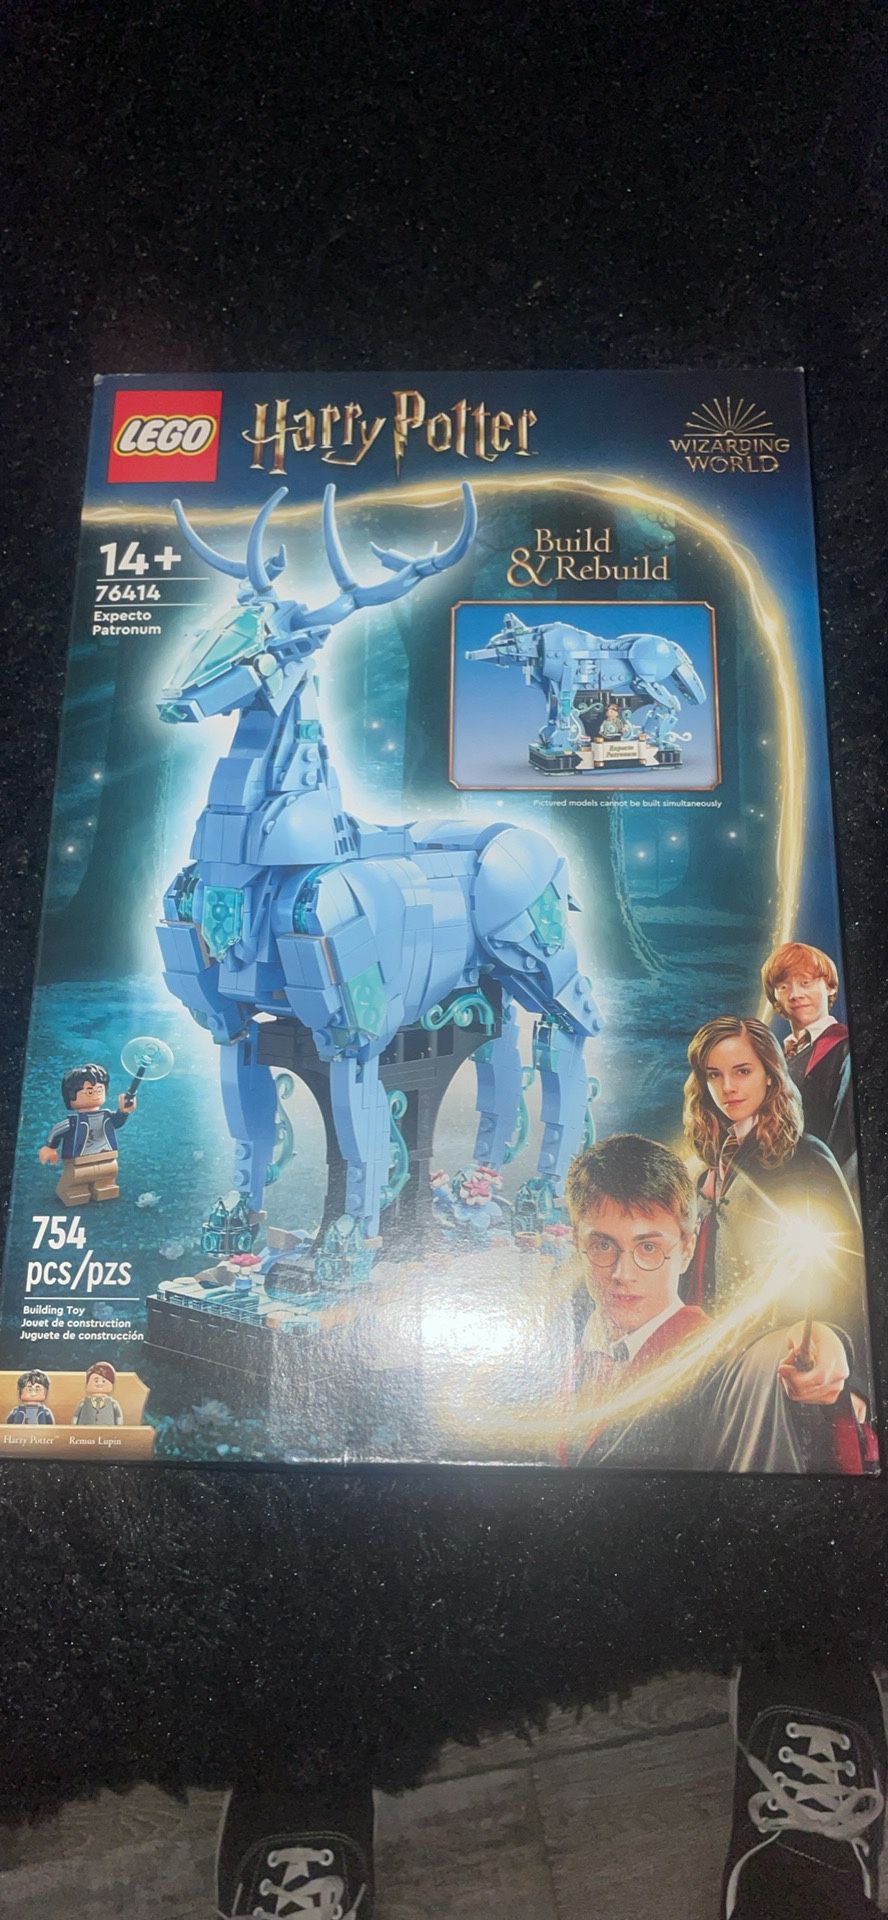 LEGO Harry Potter Expecto Patronum 76414 Collectible 2 in 1 Building Set, Build and Display Patronus Set for Teens and Fans of the Wizarding World, Ha